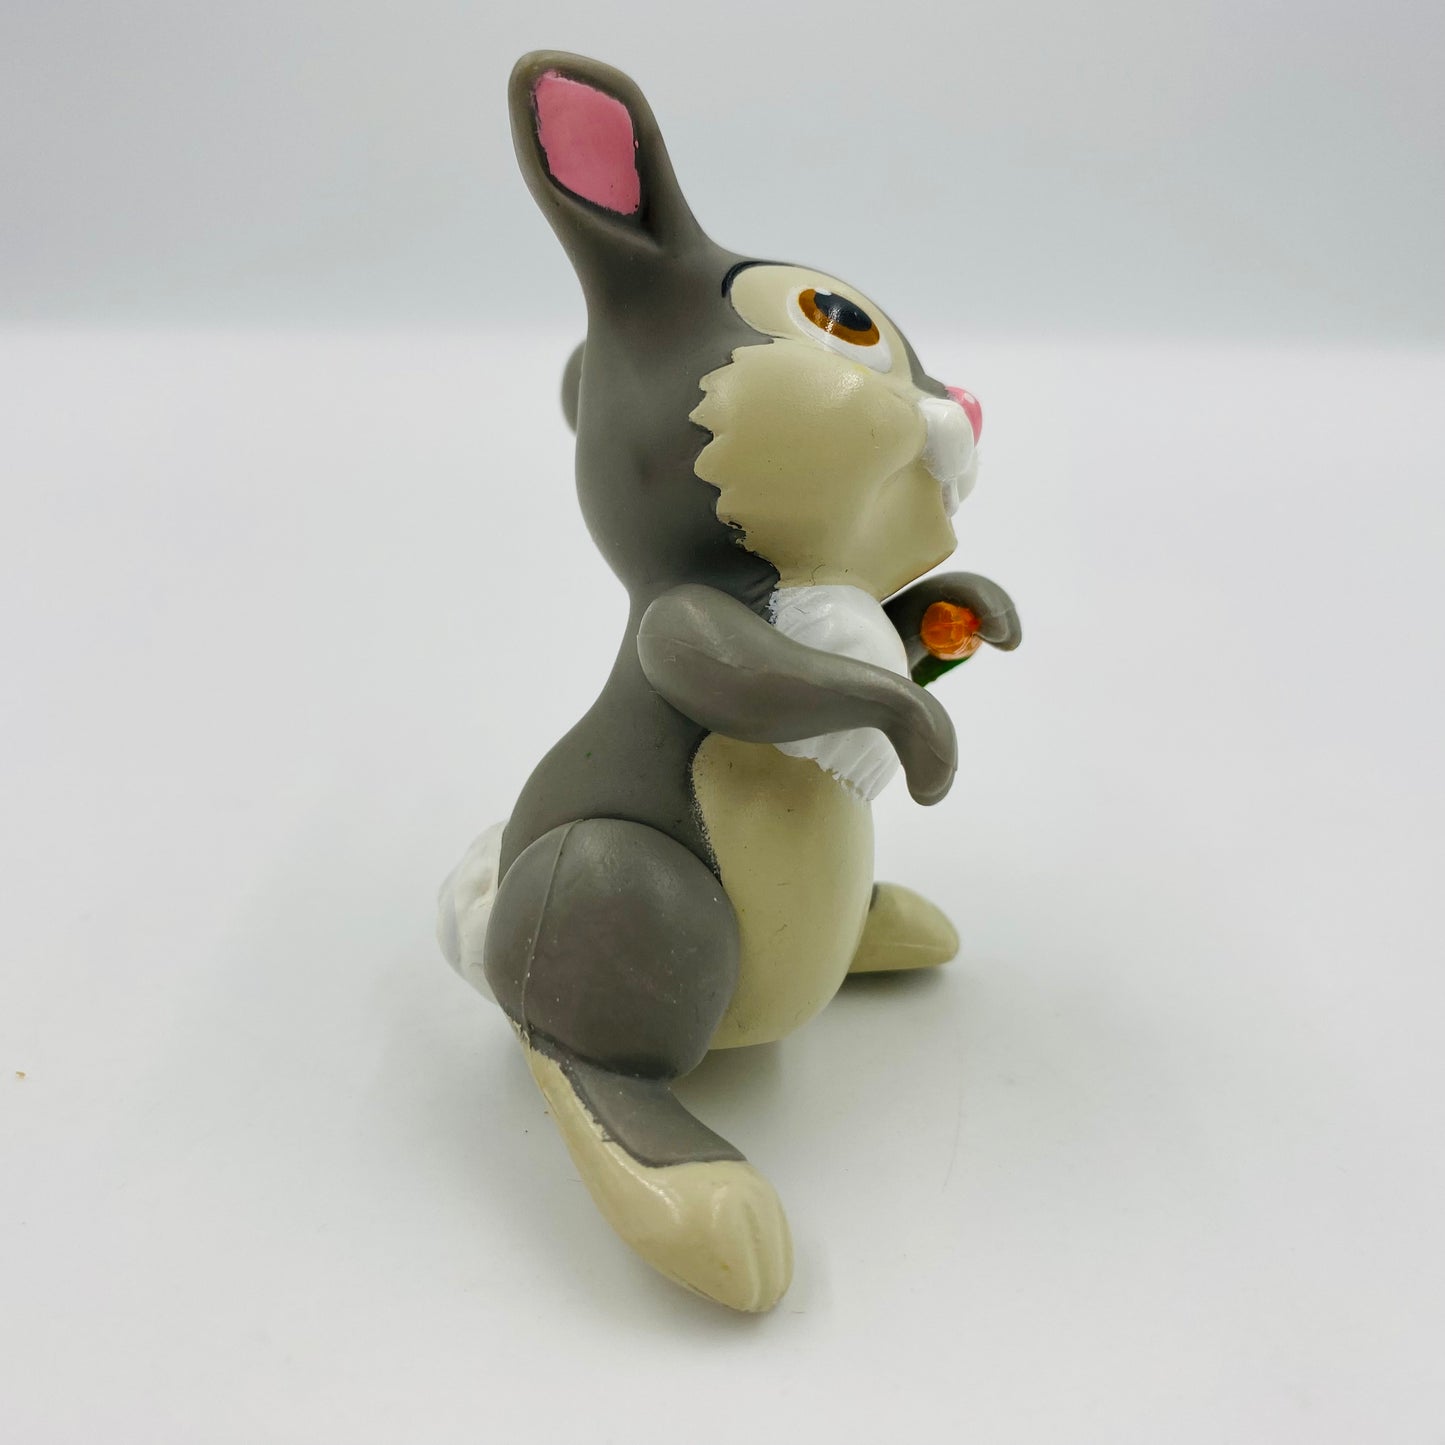 Bambi Thumper McDonald's Happy Meal toy figure (1988) loose